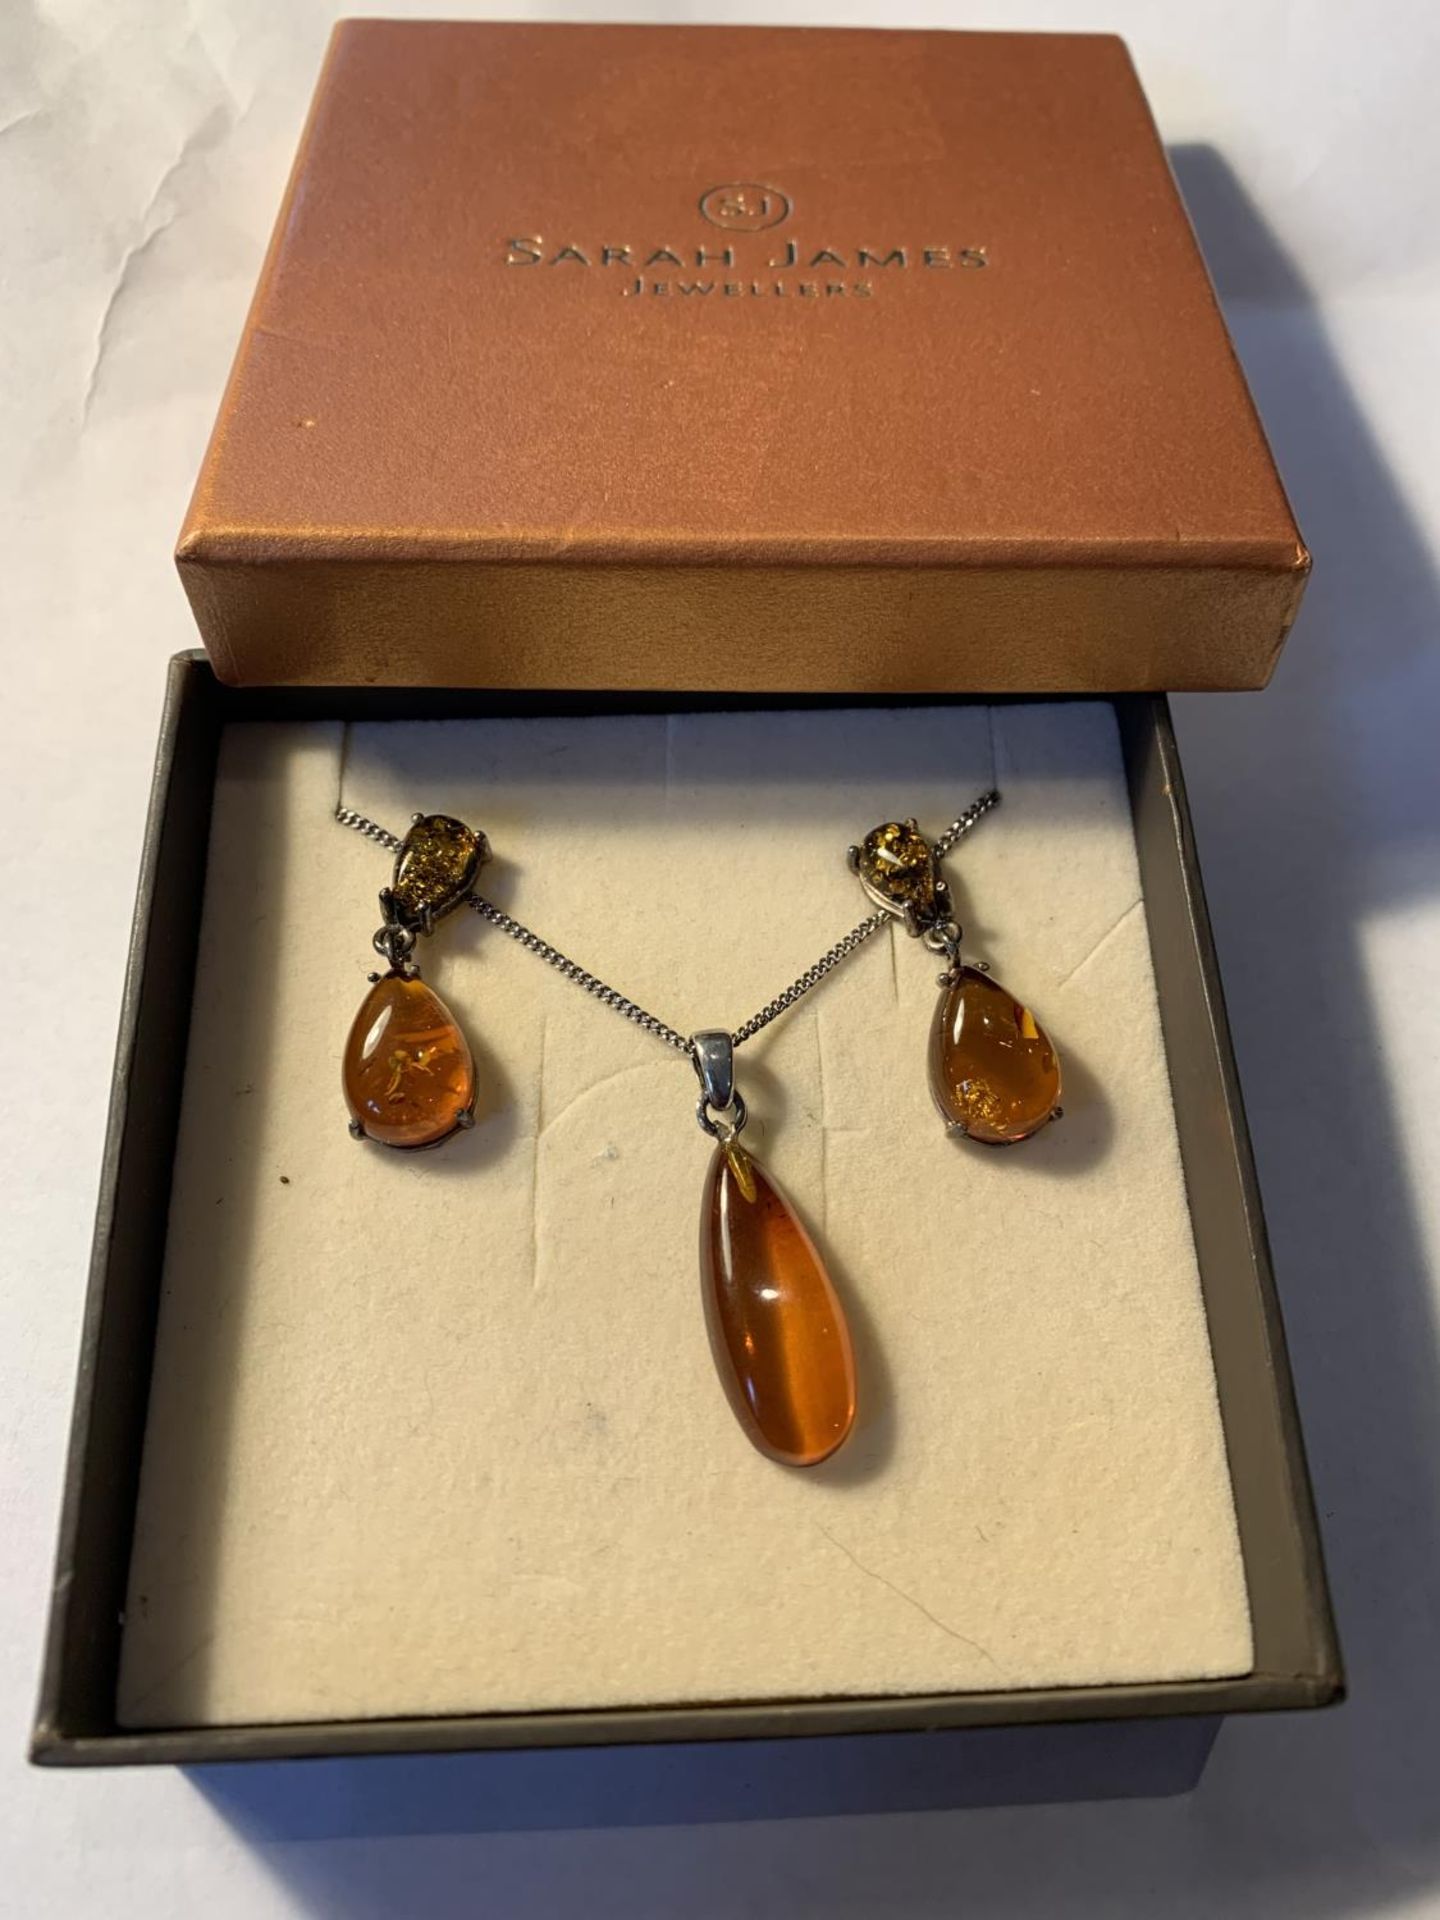 A MARKED SILVER NECKLACE WITH AMBER DROP AND MATCHING EARRINGS IN A PRESENTATION BOX